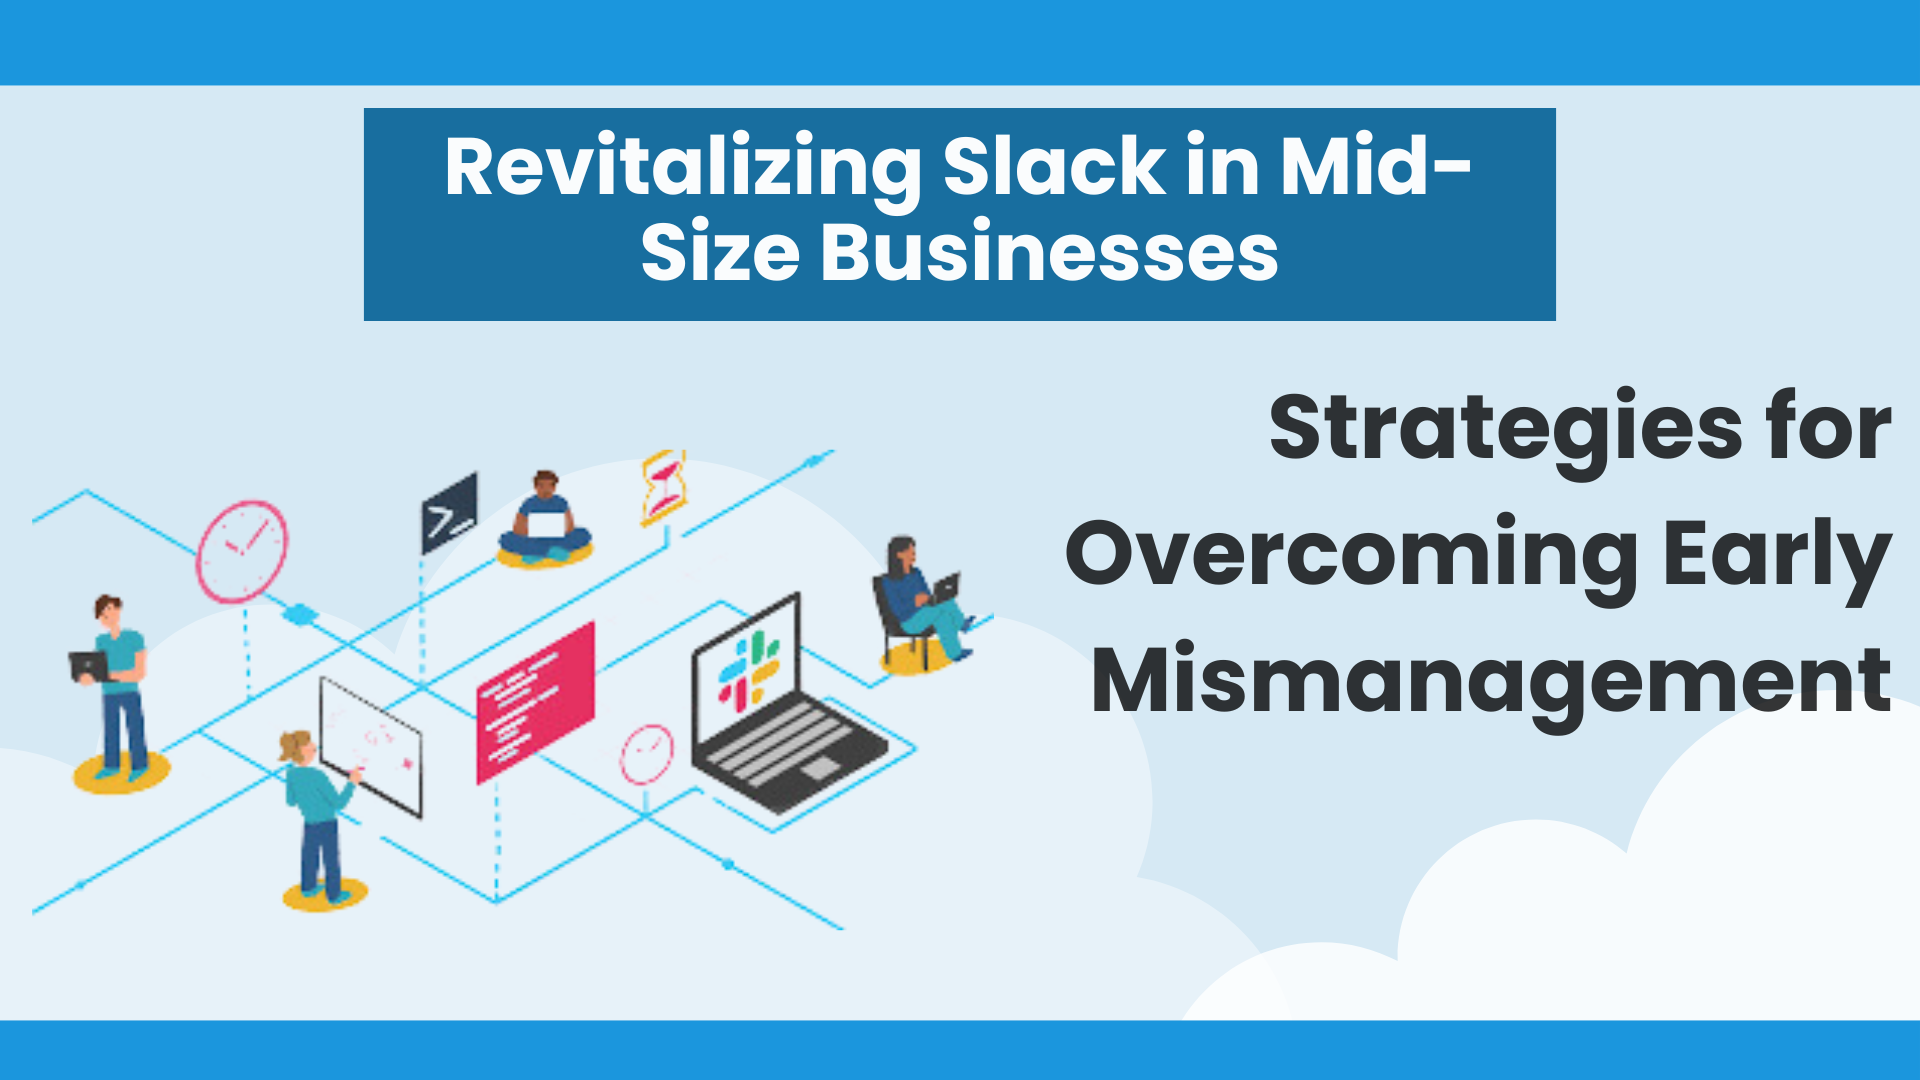 Revitalizing Slack in Mid-Size Businesses: Strategies for Overcoming Early Mismanagement